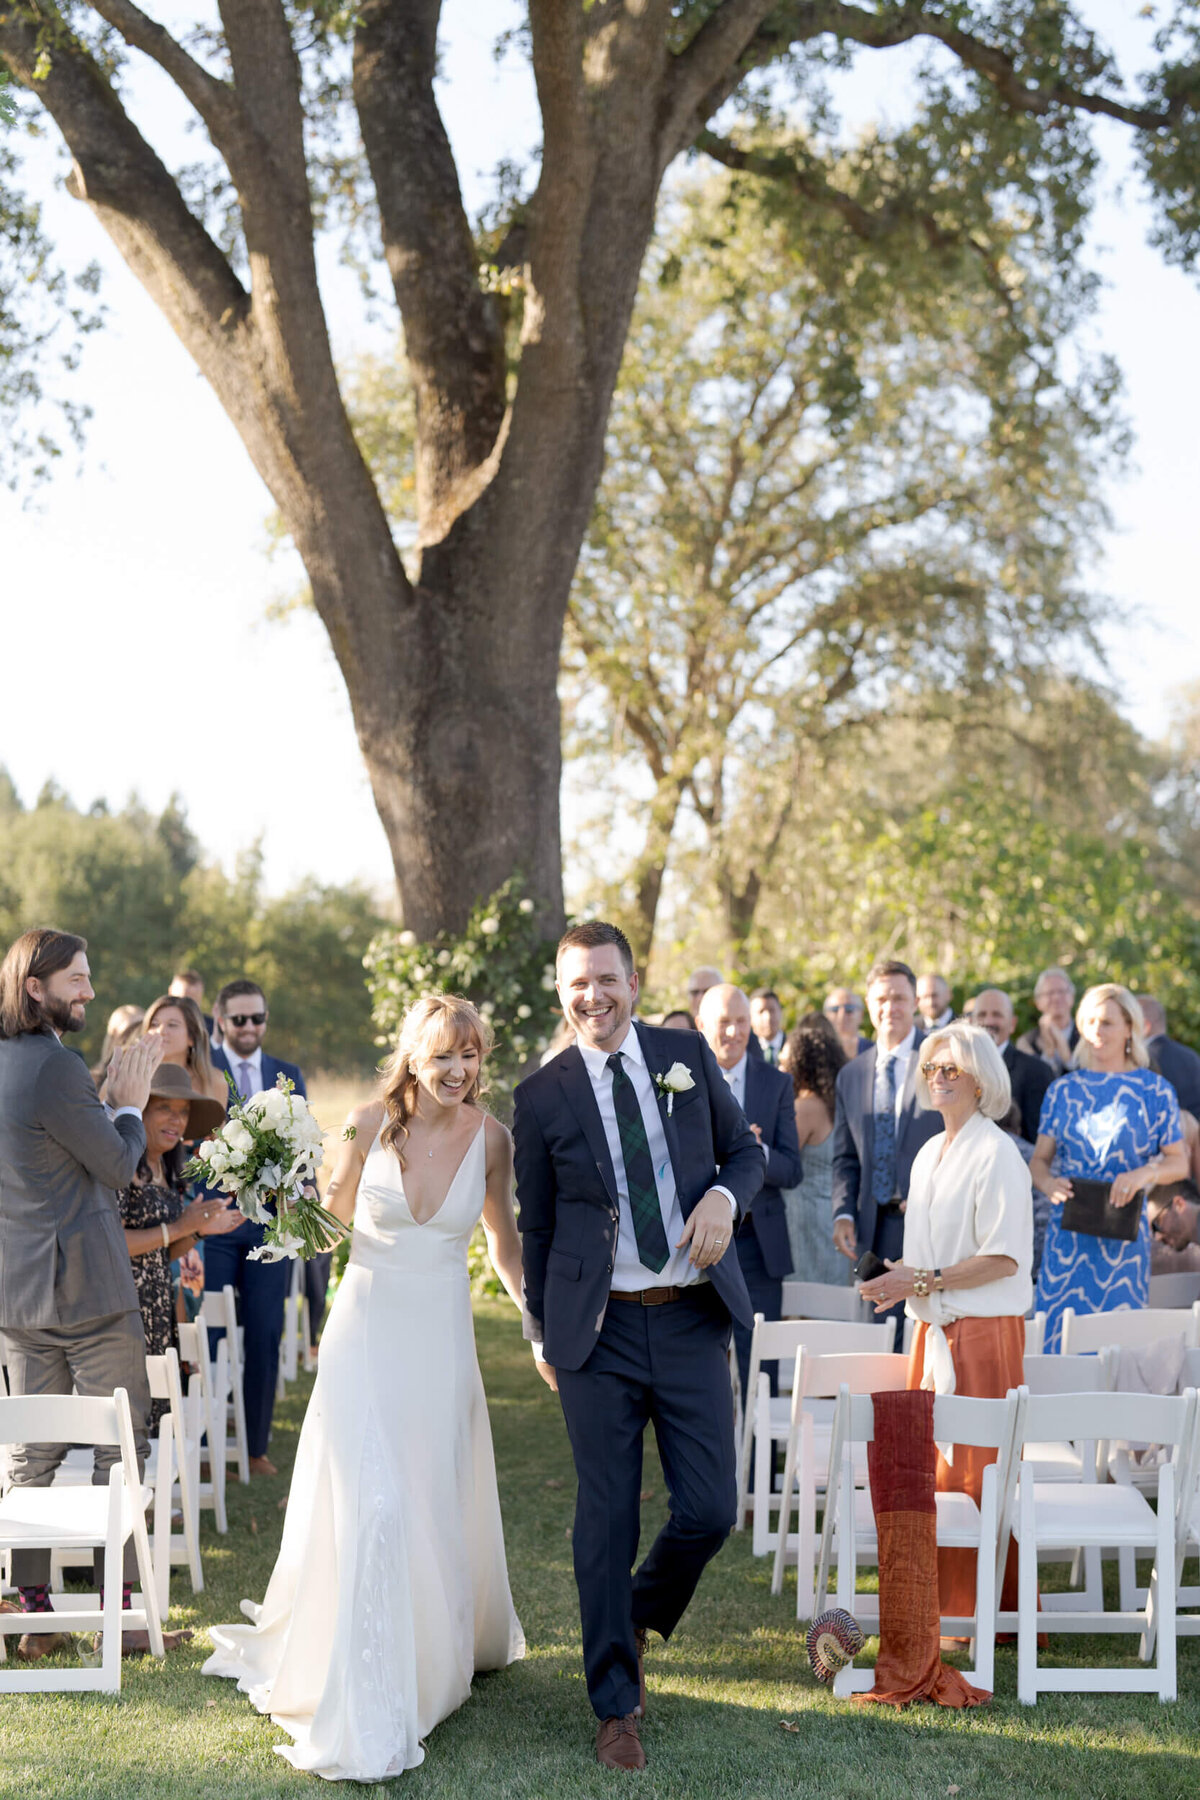 A happy married couple hold hands and walk back up the aisle. Photographed in Sonoma County by wedding photographer Robin Jolin.